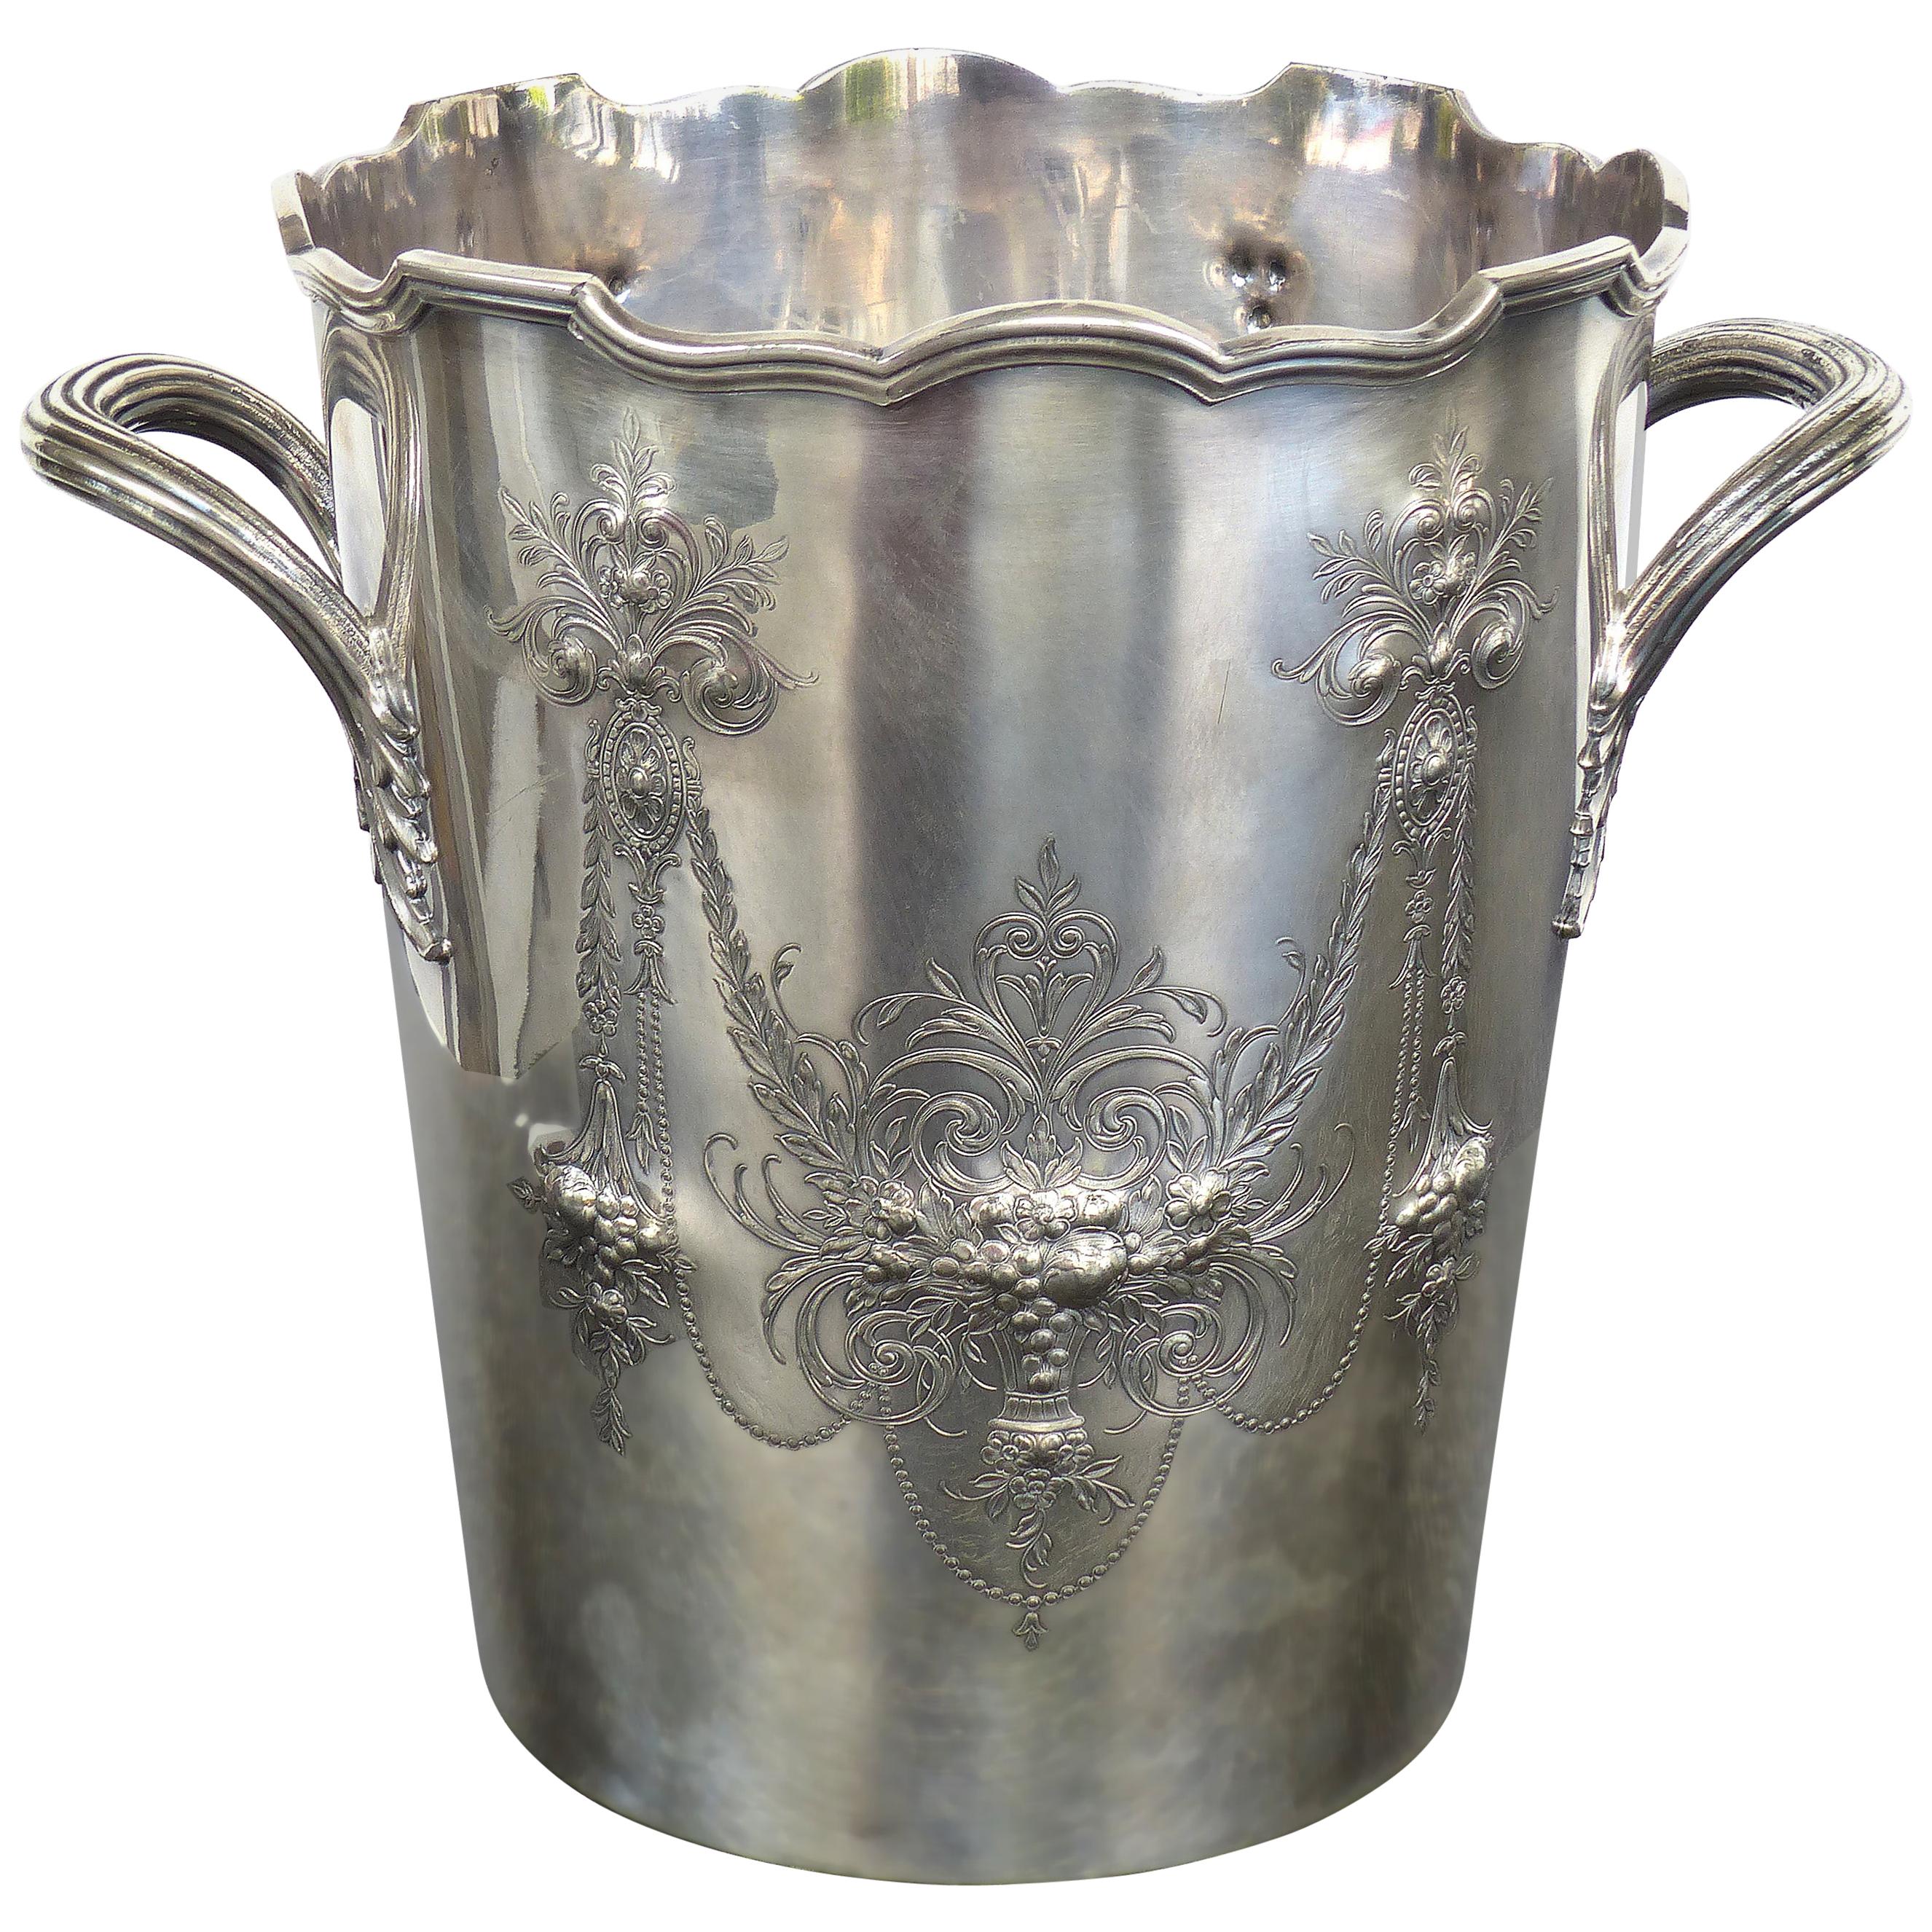 International Wilcox "Lady Mary" Ice/Champagne Bucket with 2 Handles Silverplate